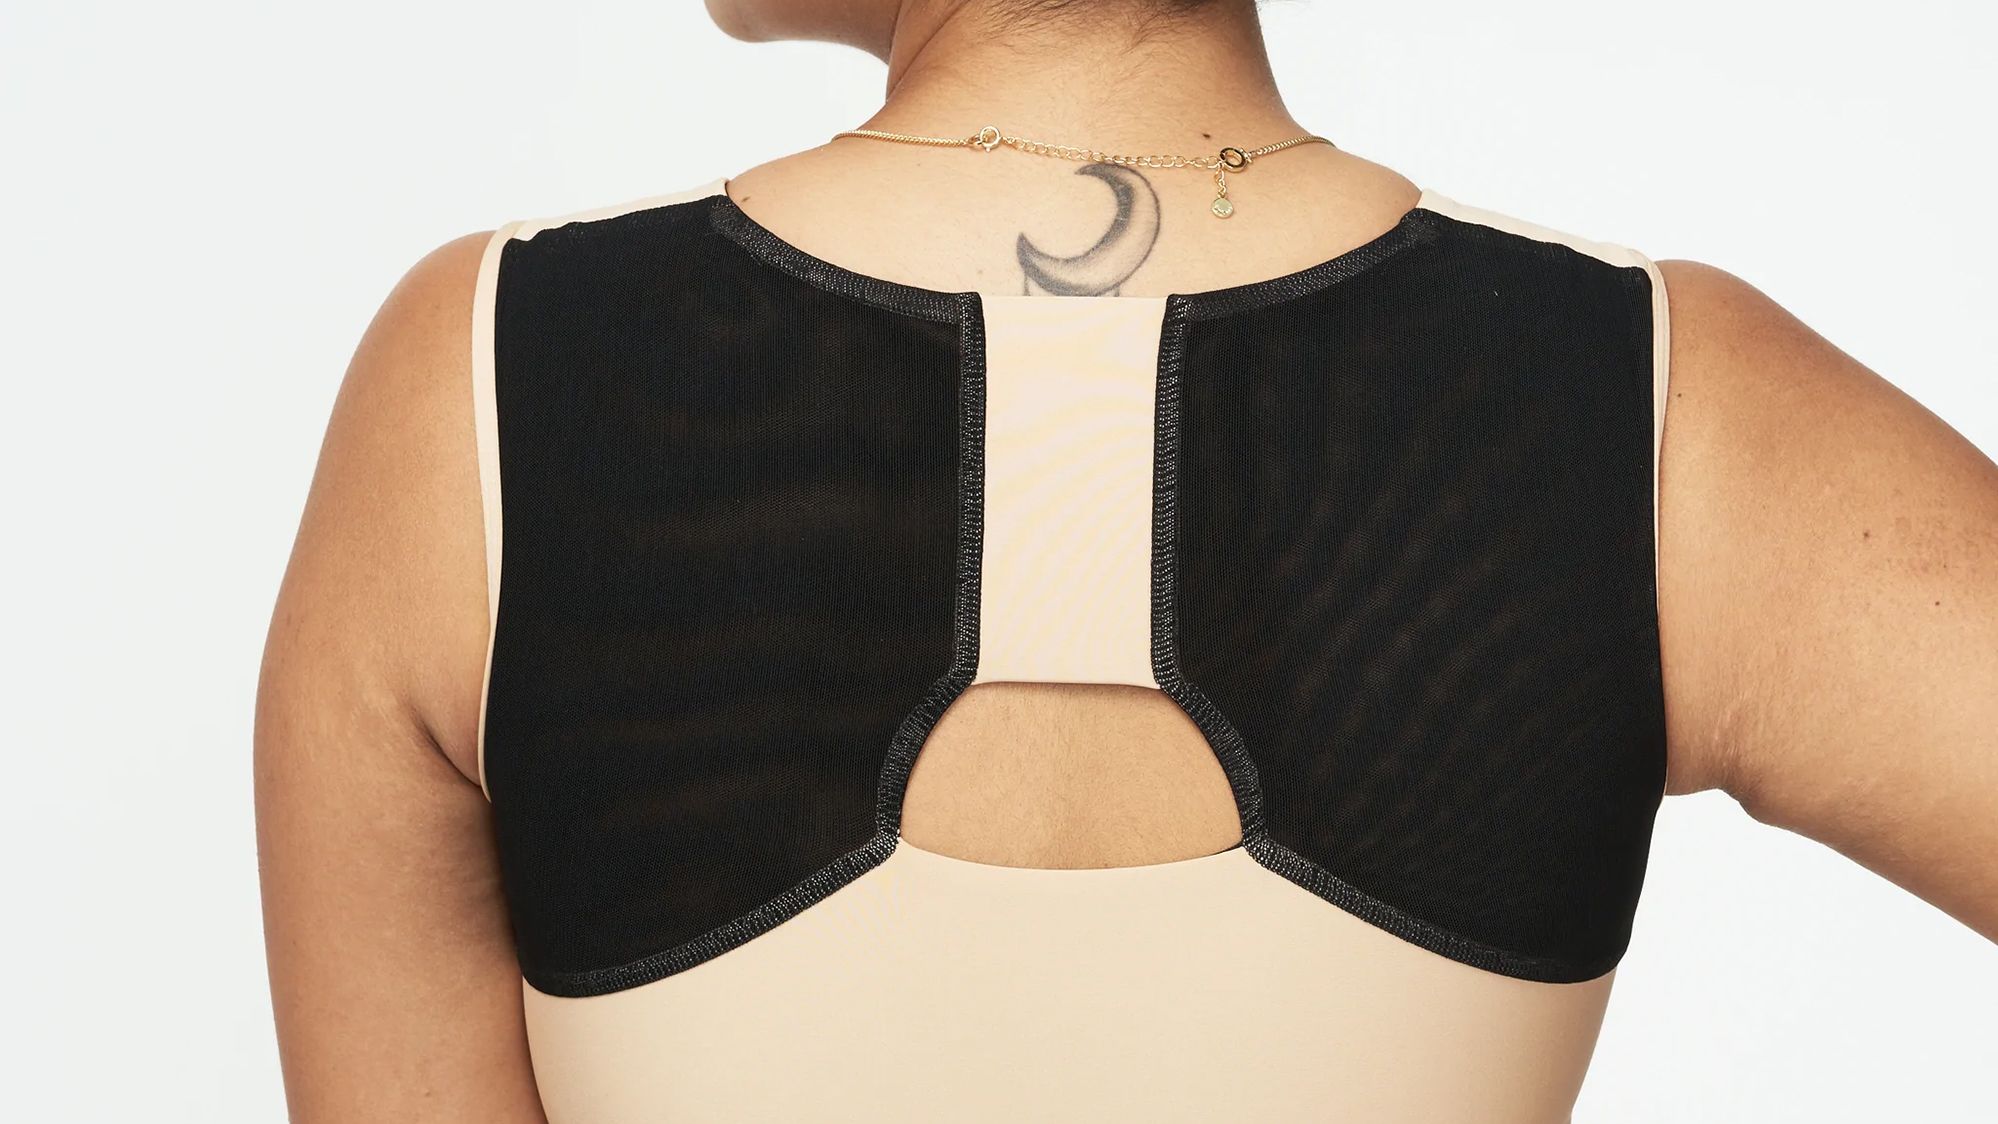 I tried Forme's Power Bra, and its posture-correcting promise fell